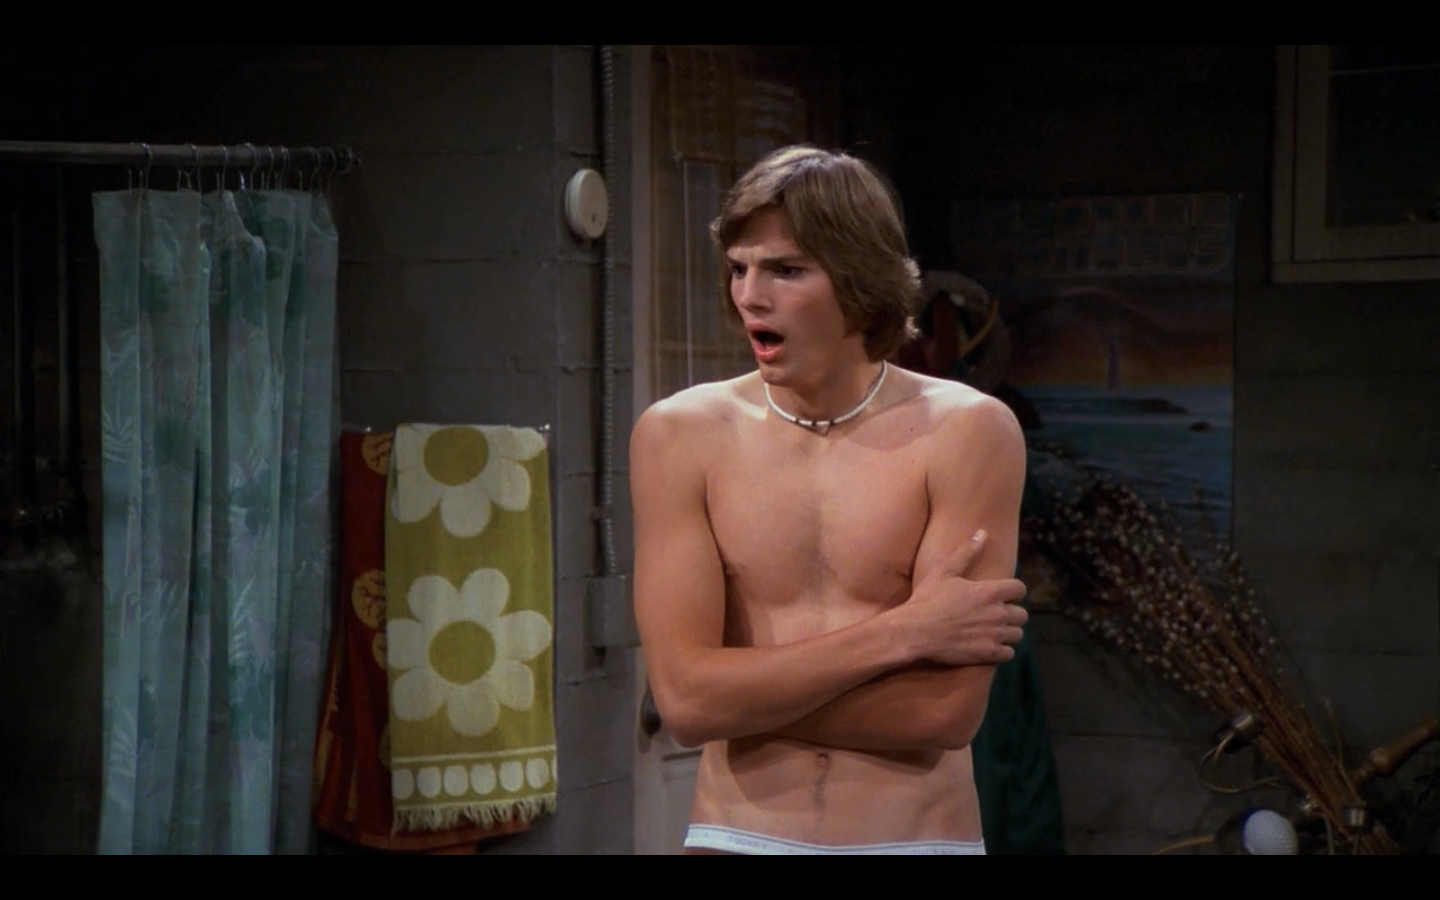 That 70s show nudity 🌈 That 70's Show - Eric's Hot Cousin - 